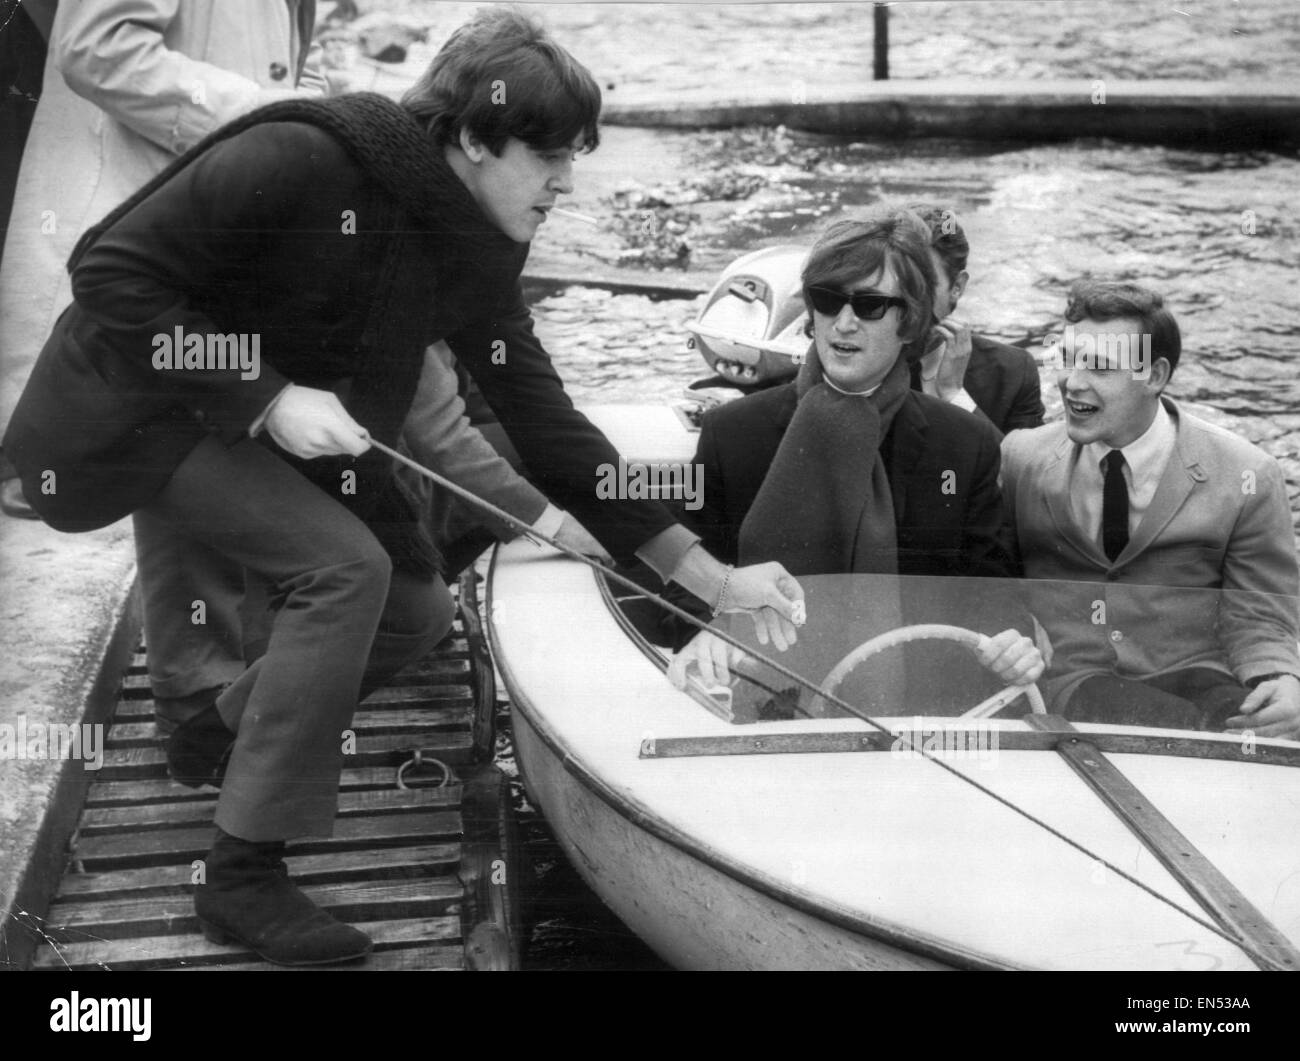 Paul McCartney pulls boat into jetty after John Lennon had been for a sail on Loch Earn in Scotland 20th October 1964. Pictured during stay in Beatles hideaway in St Fillans Perthshire. Evaluation Scan Only - If you require a high resolution copy, please Stock Photo